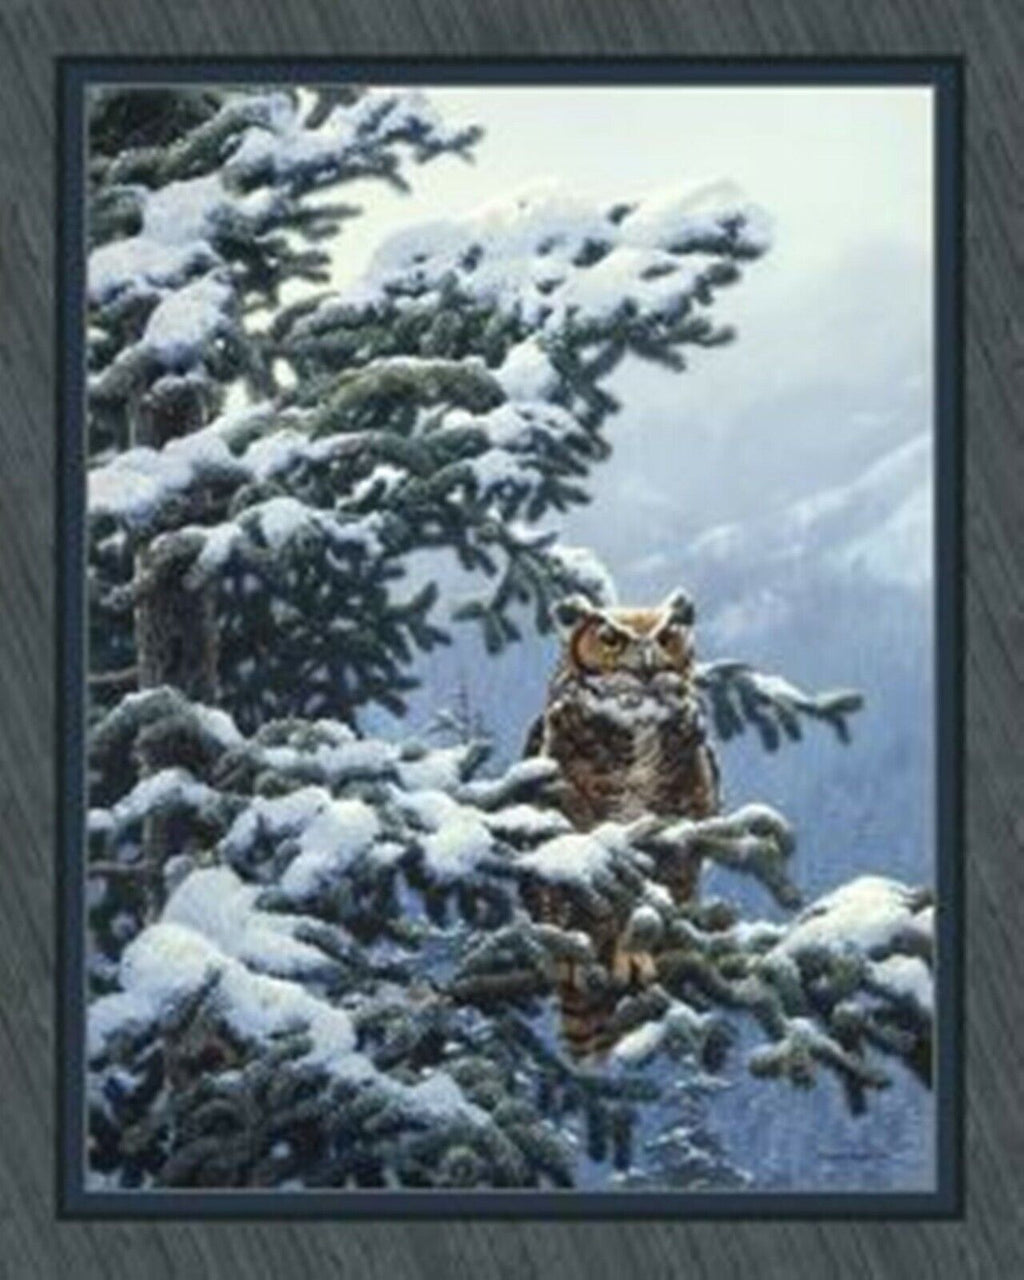 The Great Horned Owl Panel